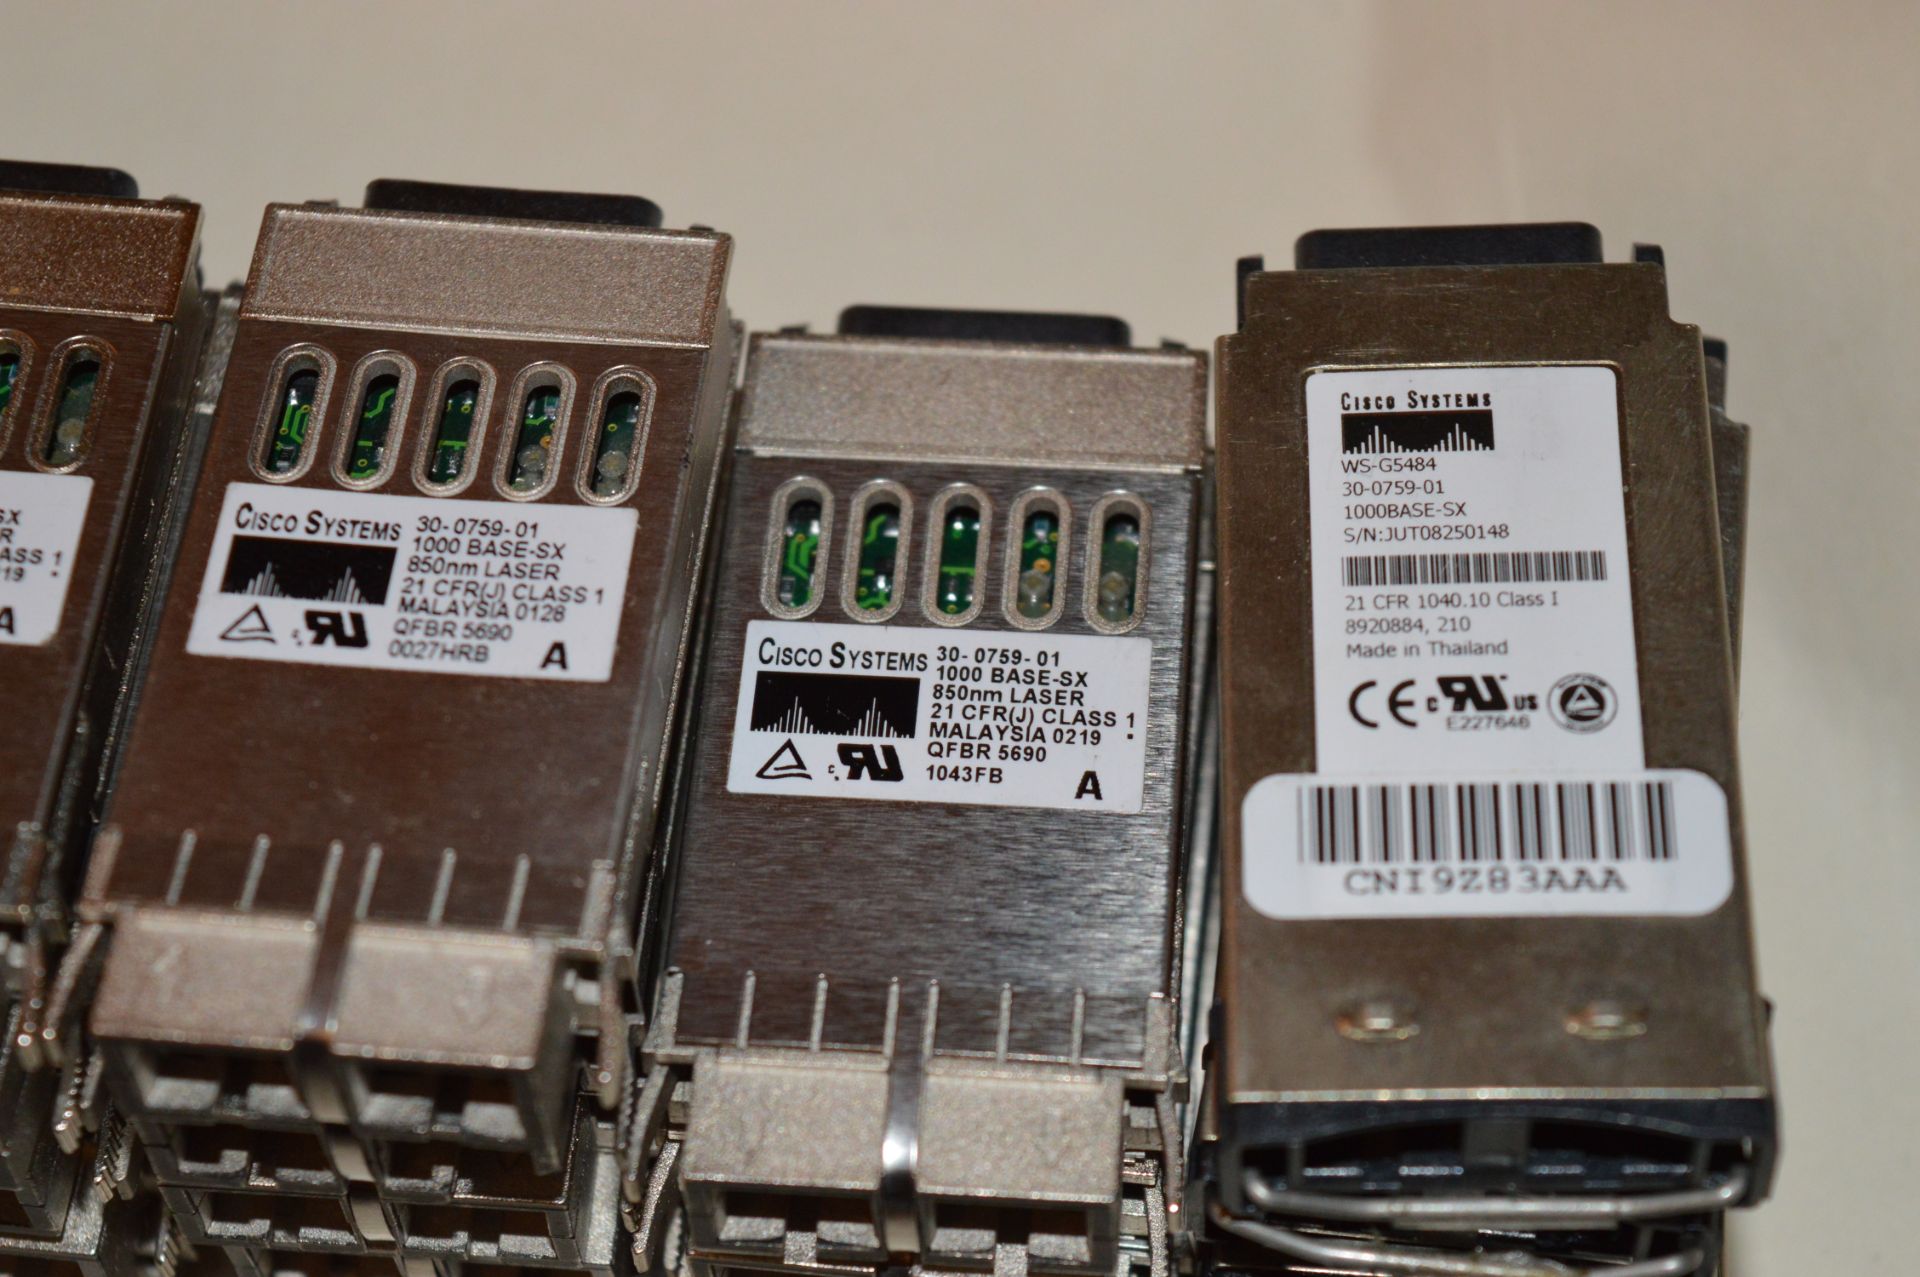 28 x Cisco Systems GBIC Transceivers - Mainly Type 30-0759-01 - Some Others Also Included - CL010 - - Image 2 of 4